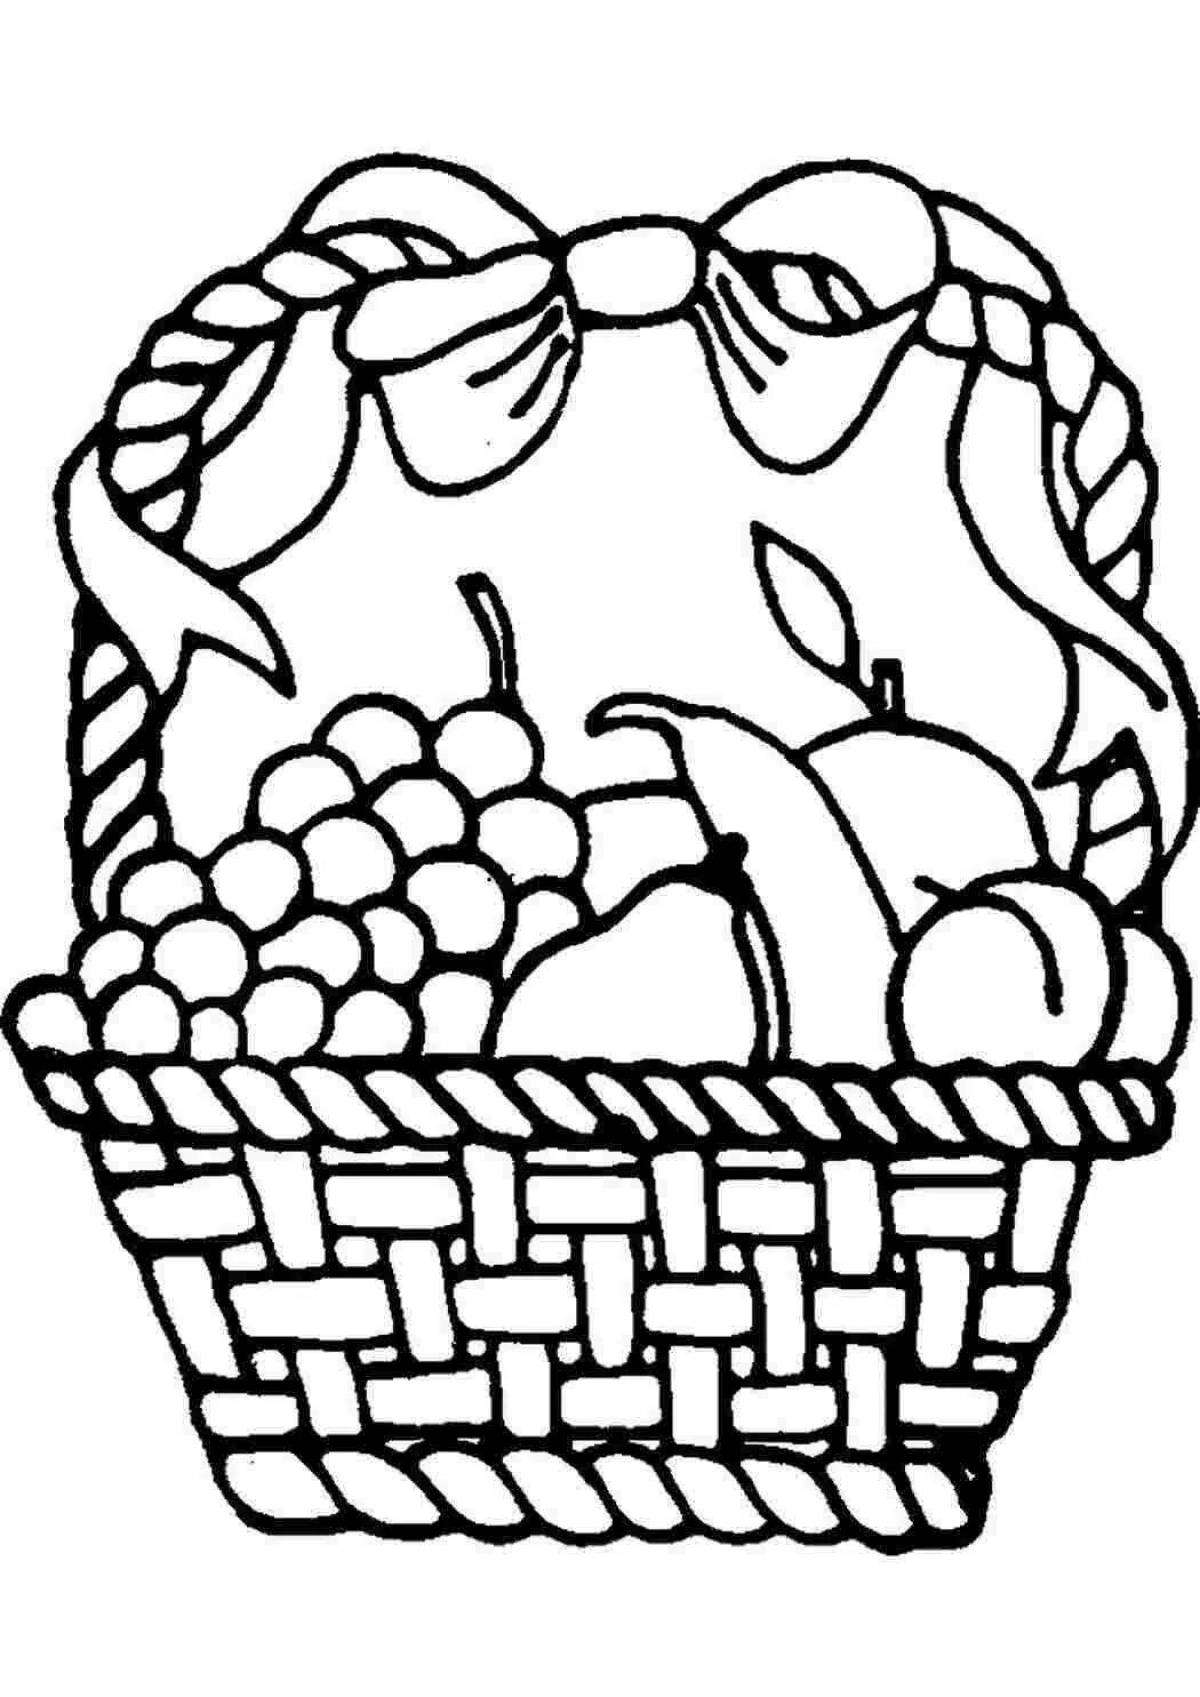 Amazing fruit basket coloring book for kids